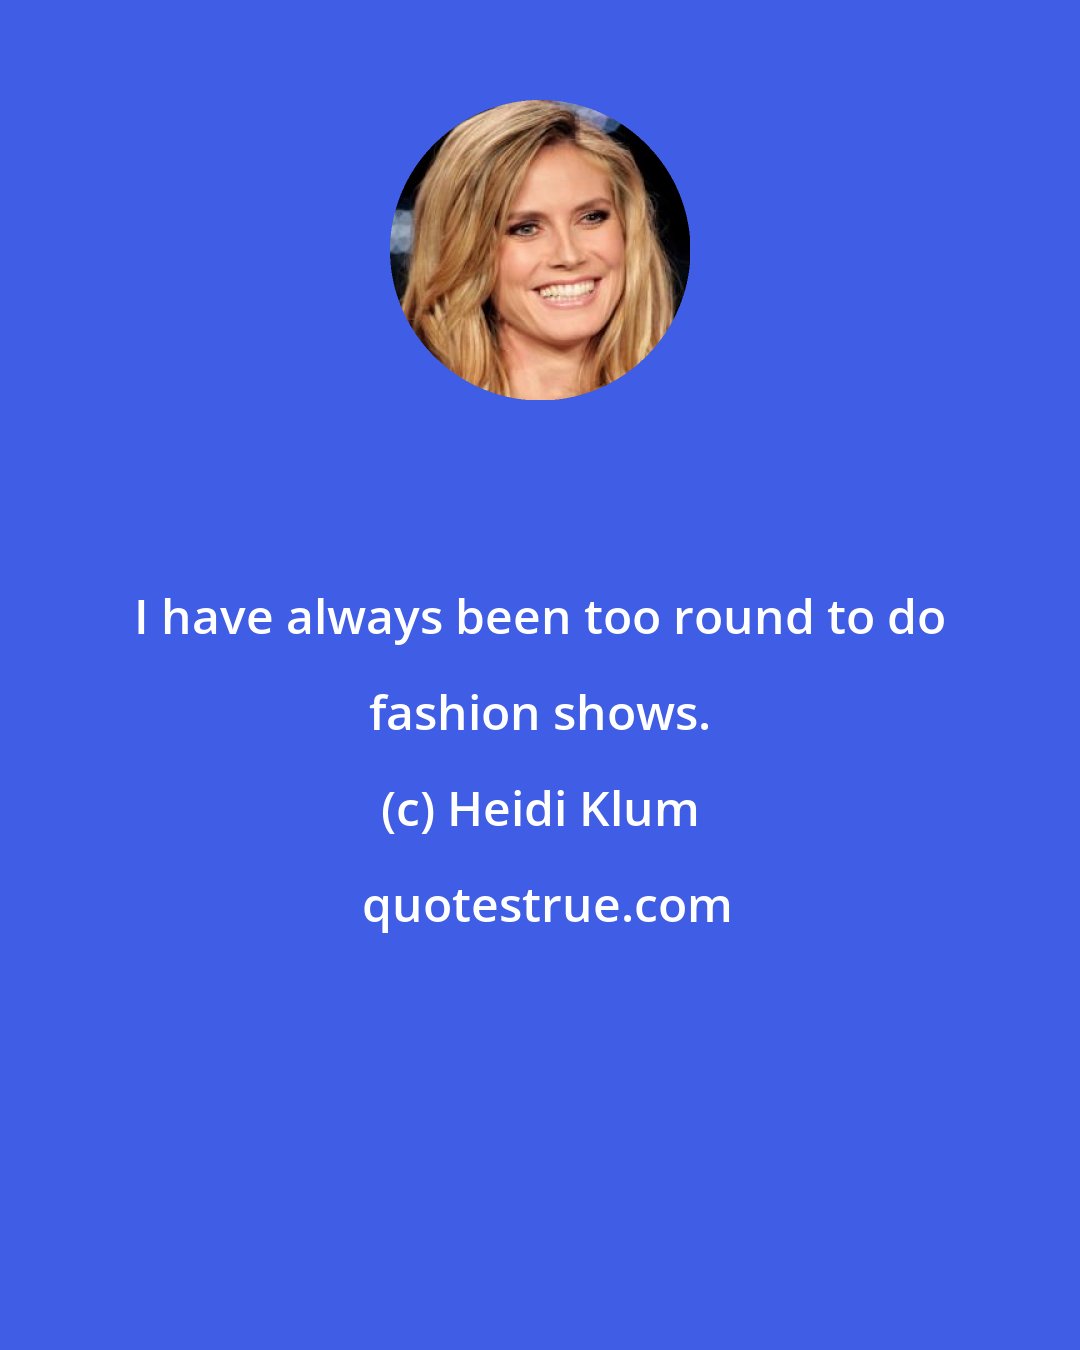 Heidi Klum: I have always been too round to do fashion shows.